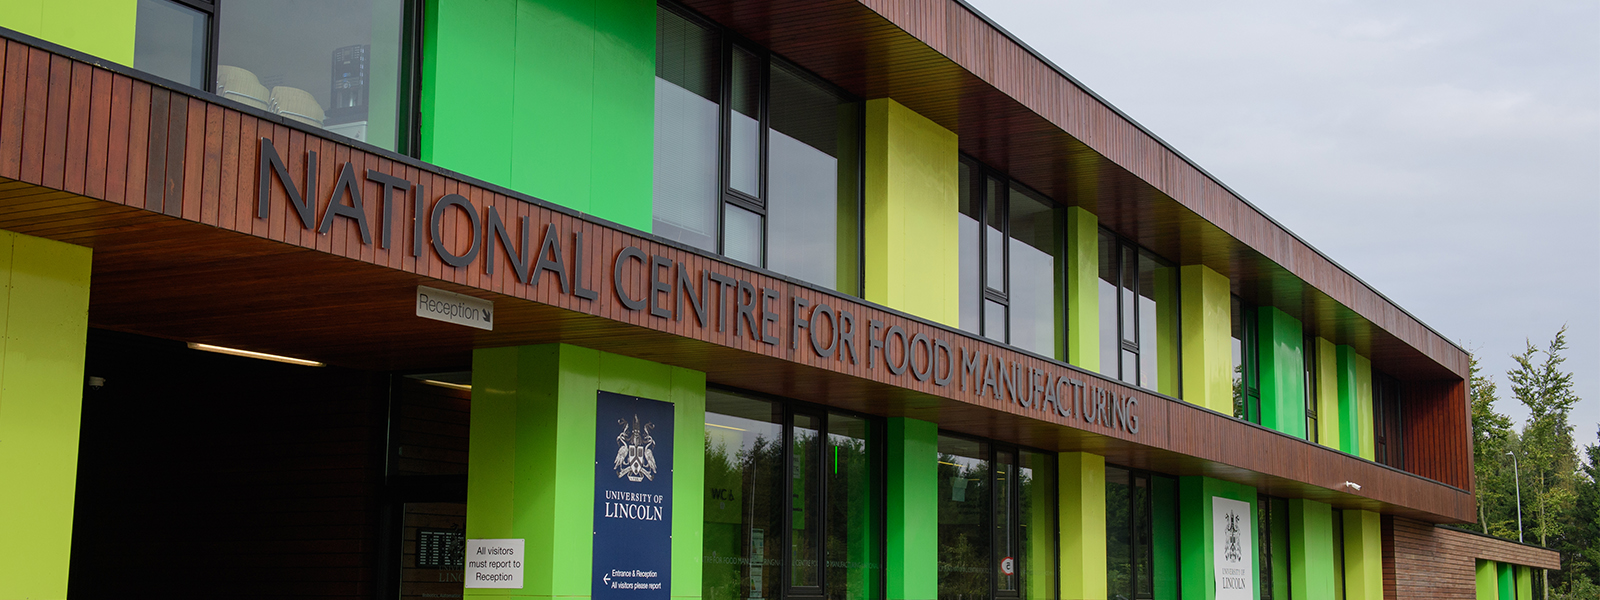 Exterior image of National Centre for Food Manufacturing NCFM 2017